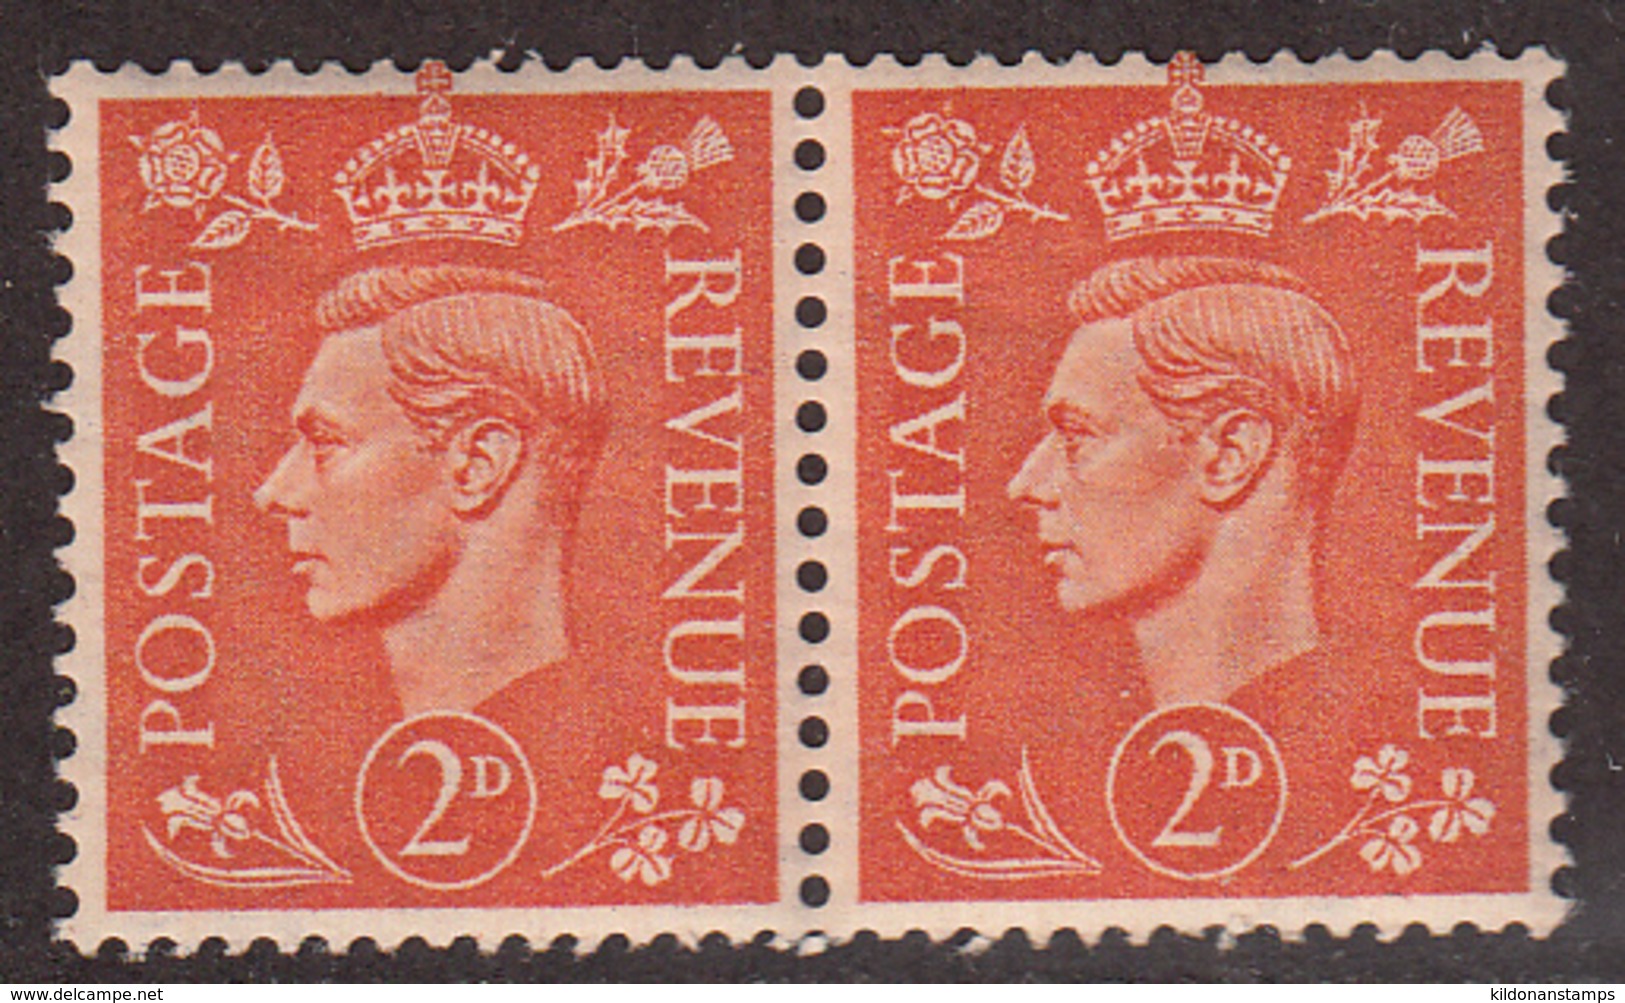 Great Britain 1941-42, 1937 Definitives, Mint No Hinge, Watermark Sideways, Pair, Sc# 261a SG# 488a - Unused Stamps